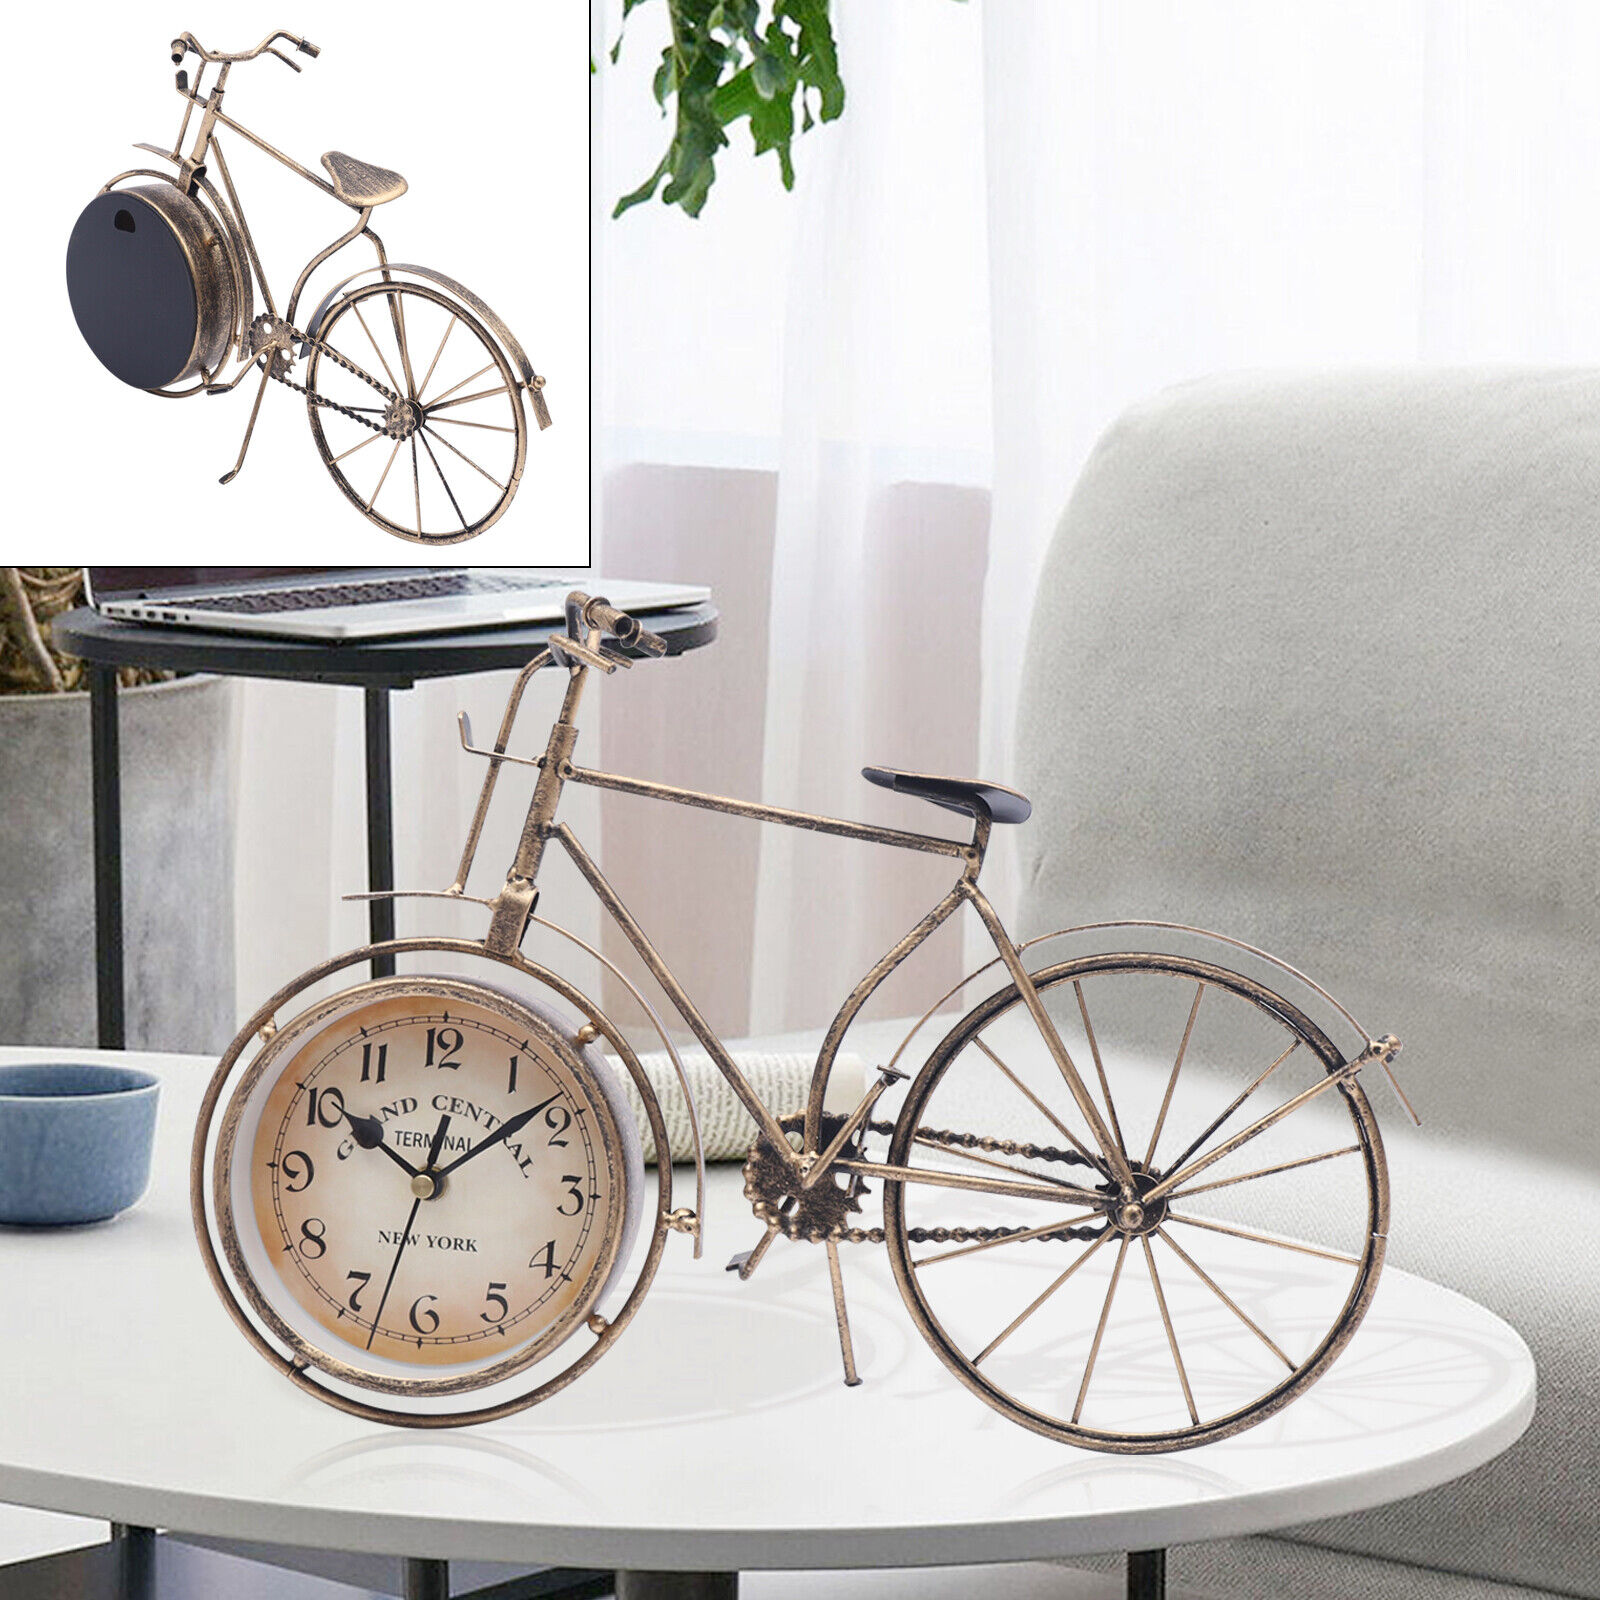 Bicycle Desk Clock Classic Old Fashioned Decorative Clock Vintage Retro Style